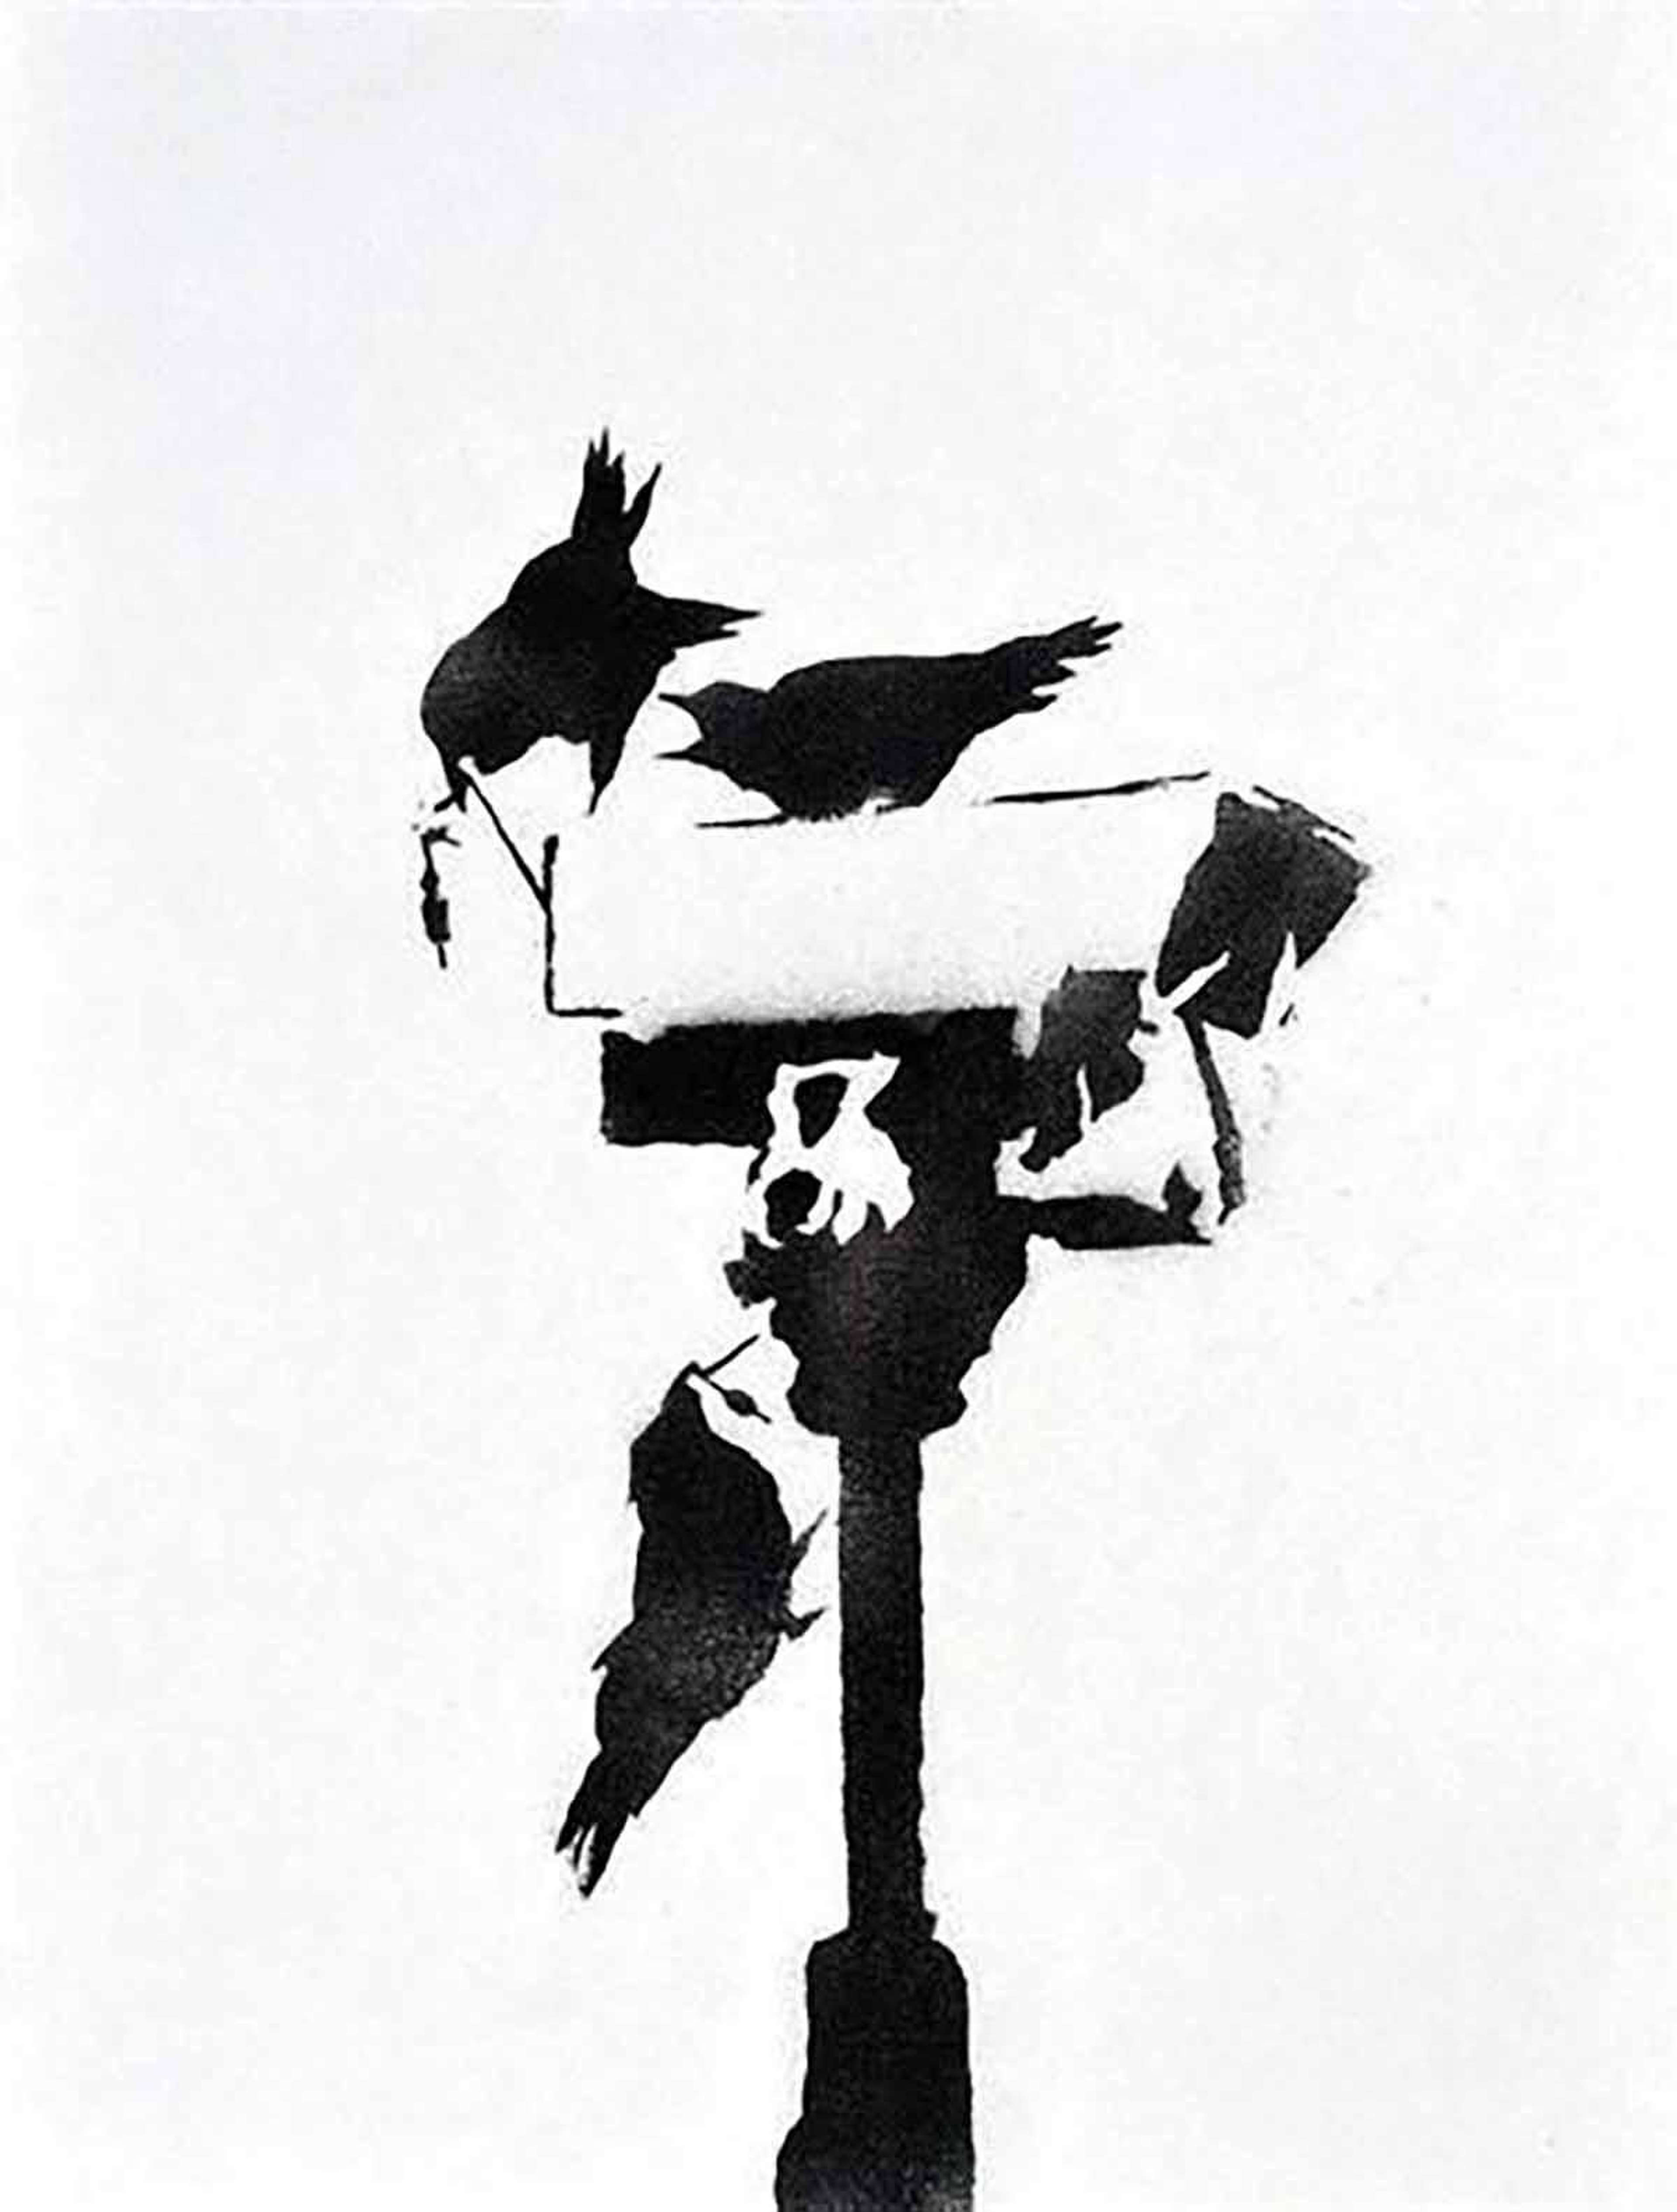 Banksy’s Angry Crows. A spray painted work of a surveillance cameras with black crows on it. 